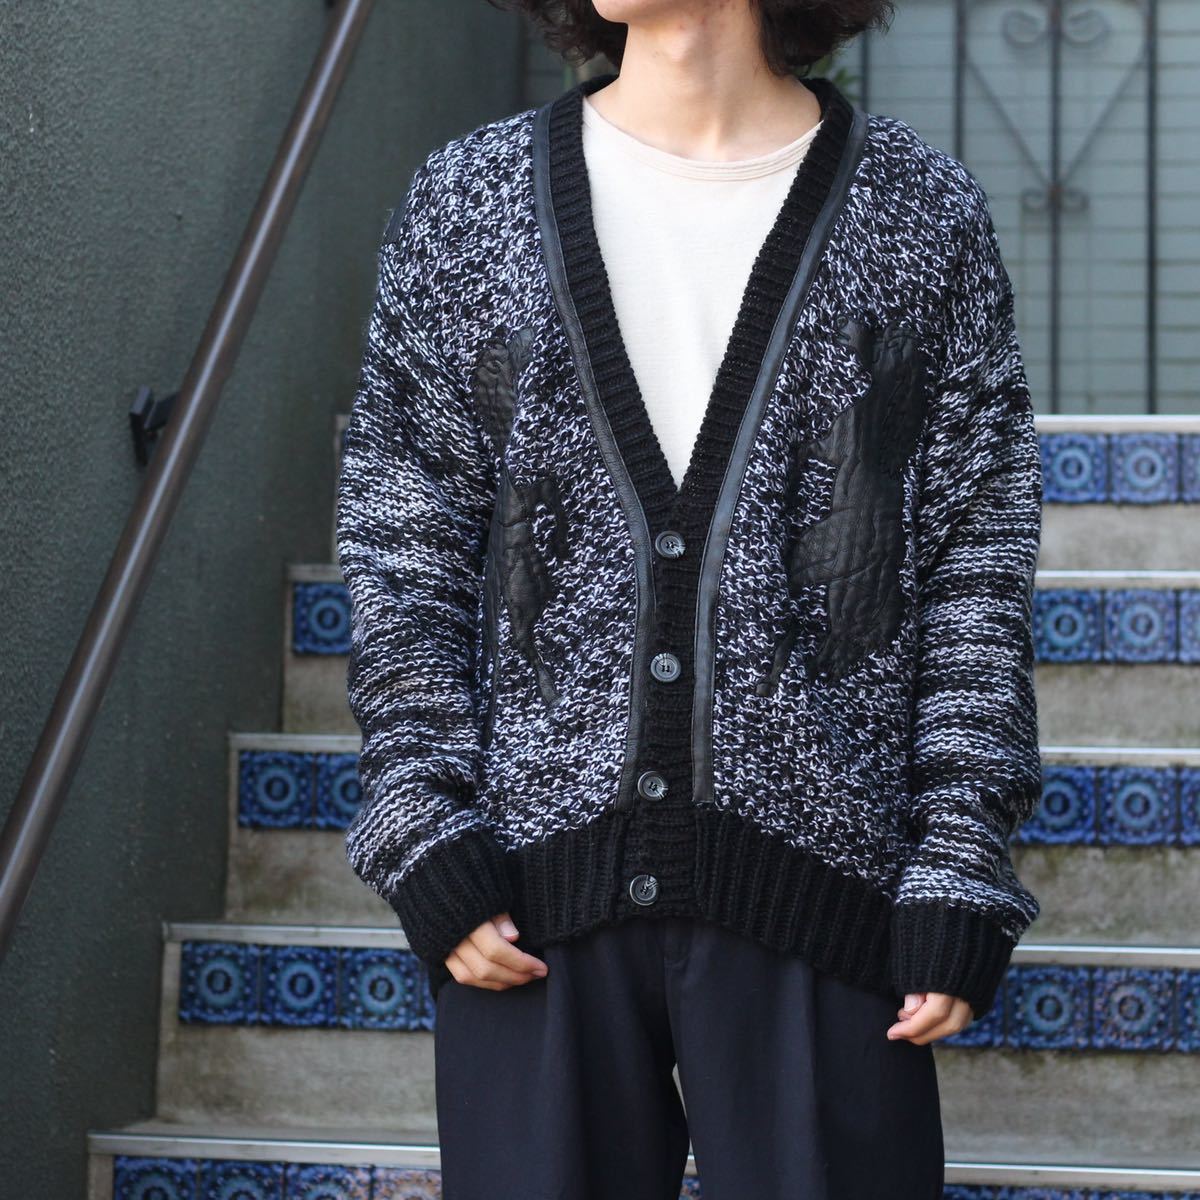 SPECIAL ITEM USA VINTAGE HORSE DESIGN LEATHER SWITCHED KNIT CARDIGAN/アメリカ古着お馬デザインレザー切替ニットカーディガン Yahoo!フリマ（旧）